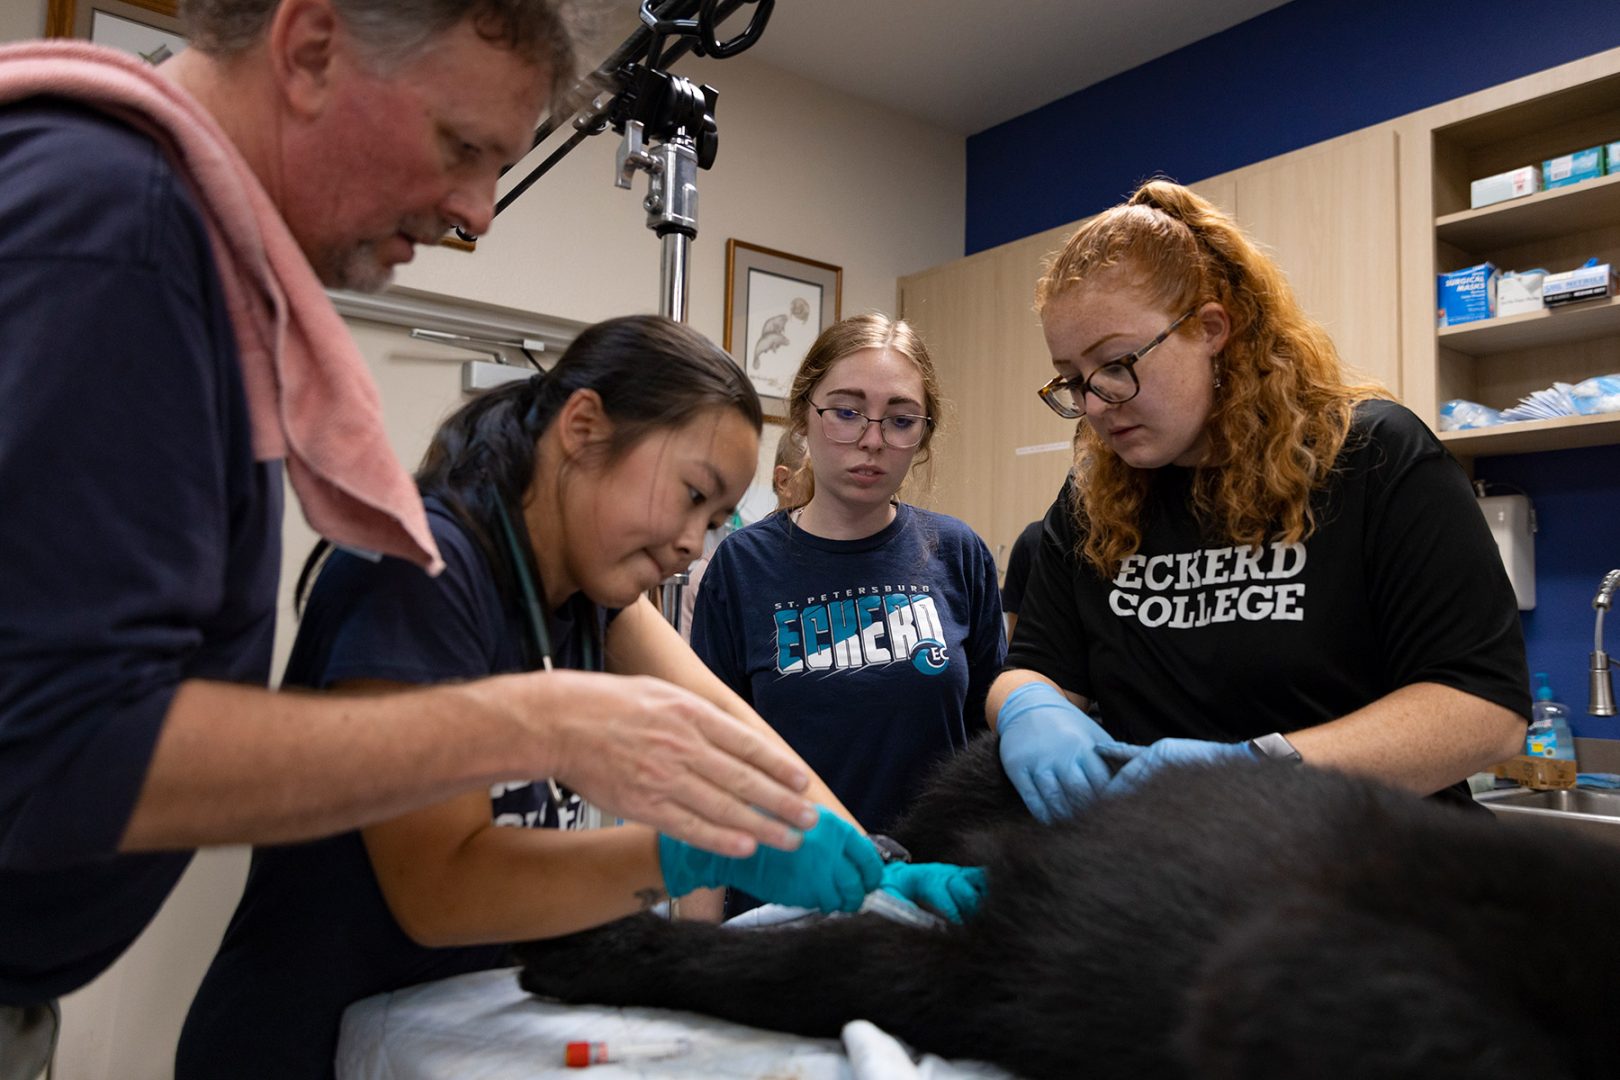  Eckerd College students help tag and treat black bear cubs at state wildlife park 